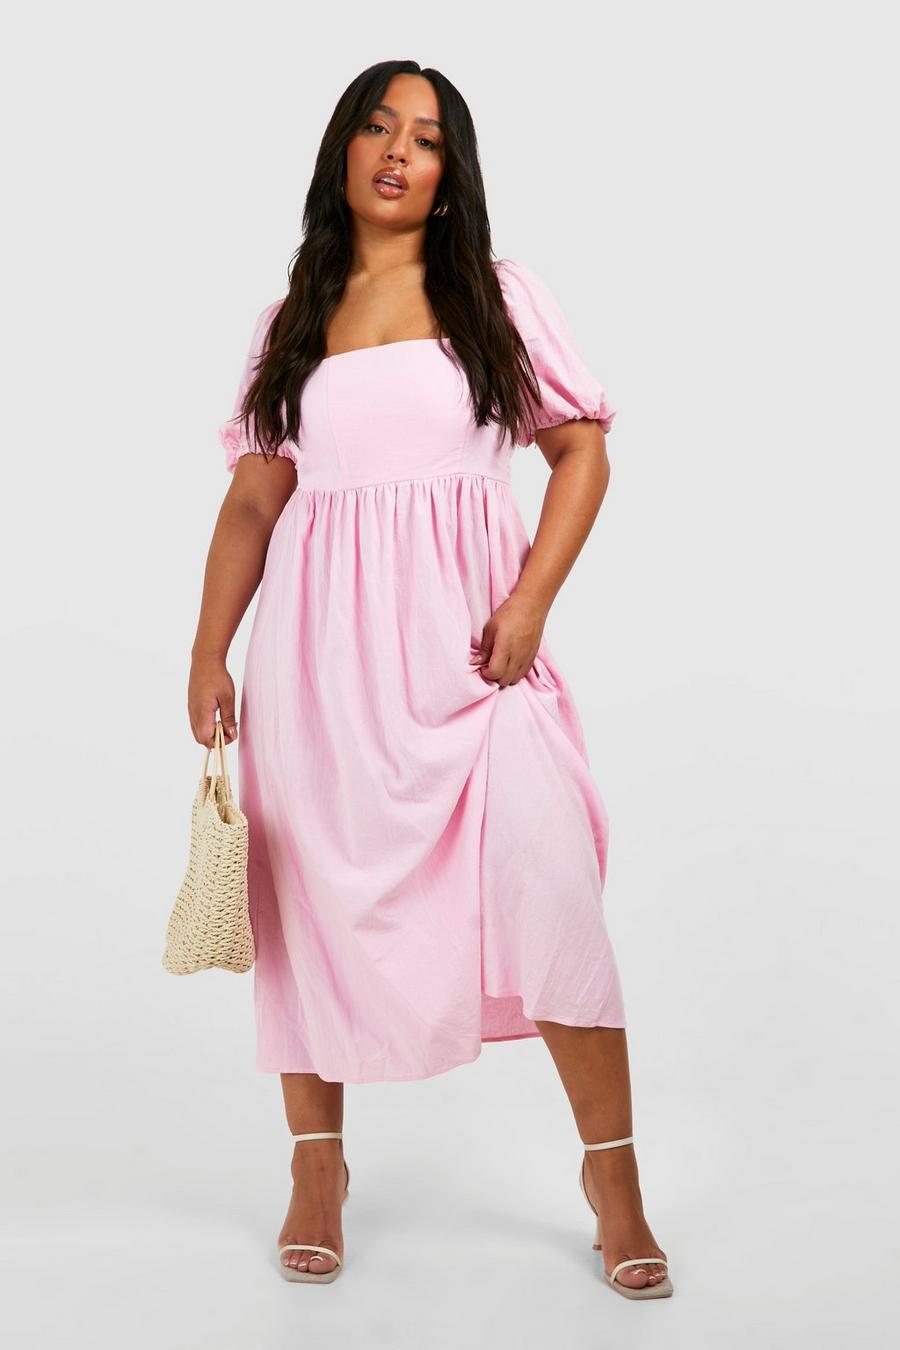 SHEIN USA  Pink plus size dresses, Plus size homecoming dresses, Pink  dress outfits